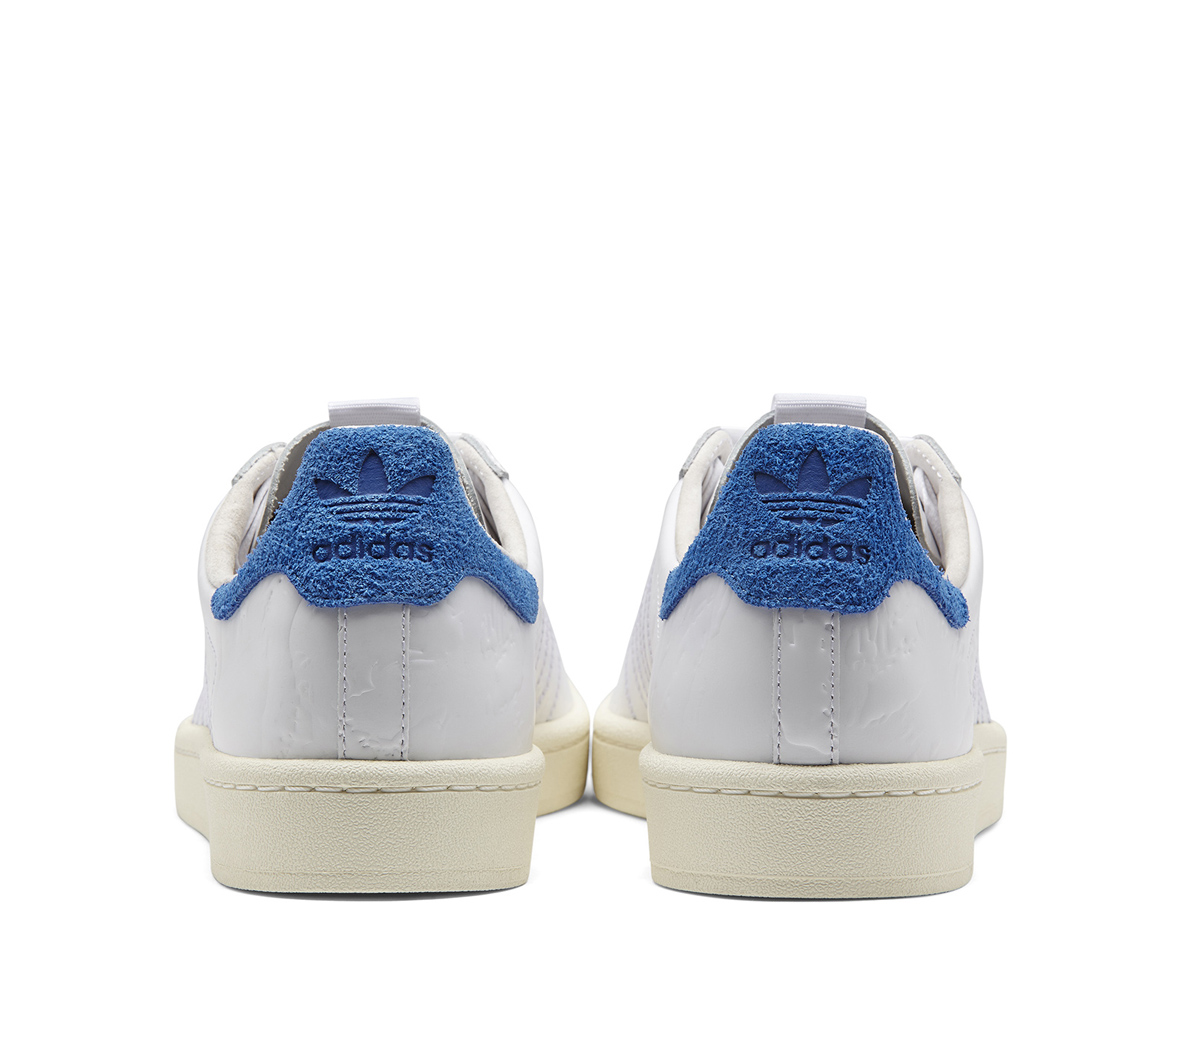 adidas x undefeated x colette